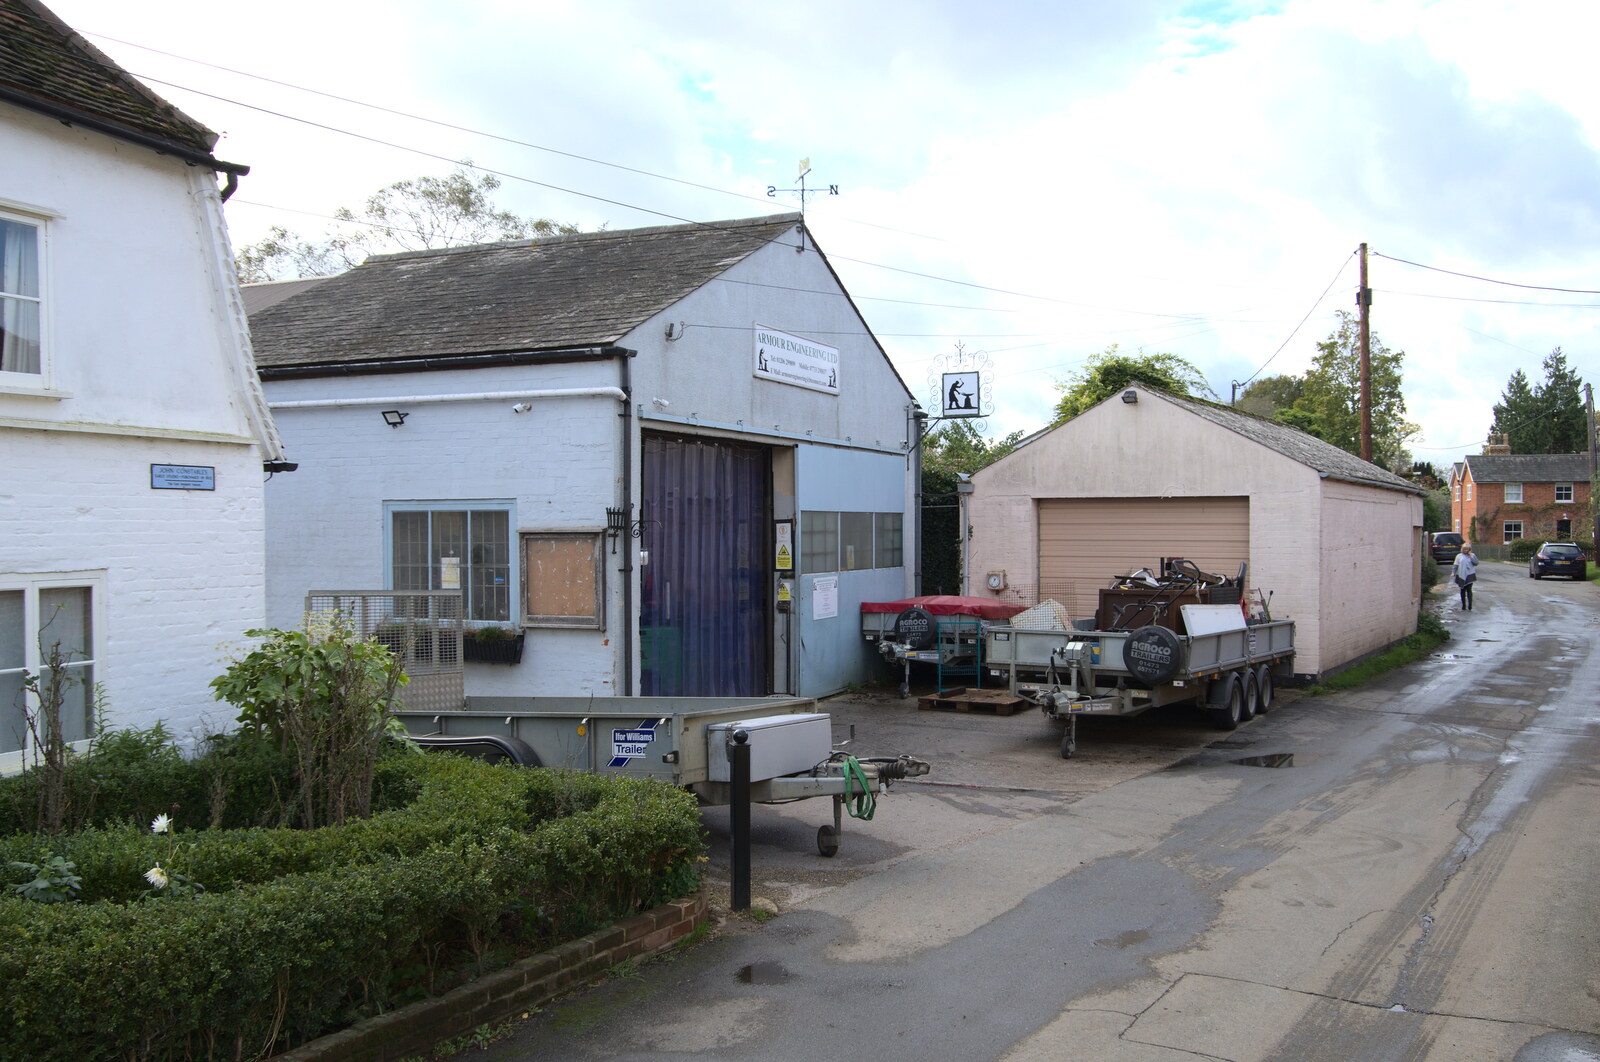 A Postcard from Flatford and Dedham, Suffolk and Essex, 9th November 2022: Armour Engineering - an old-school garage